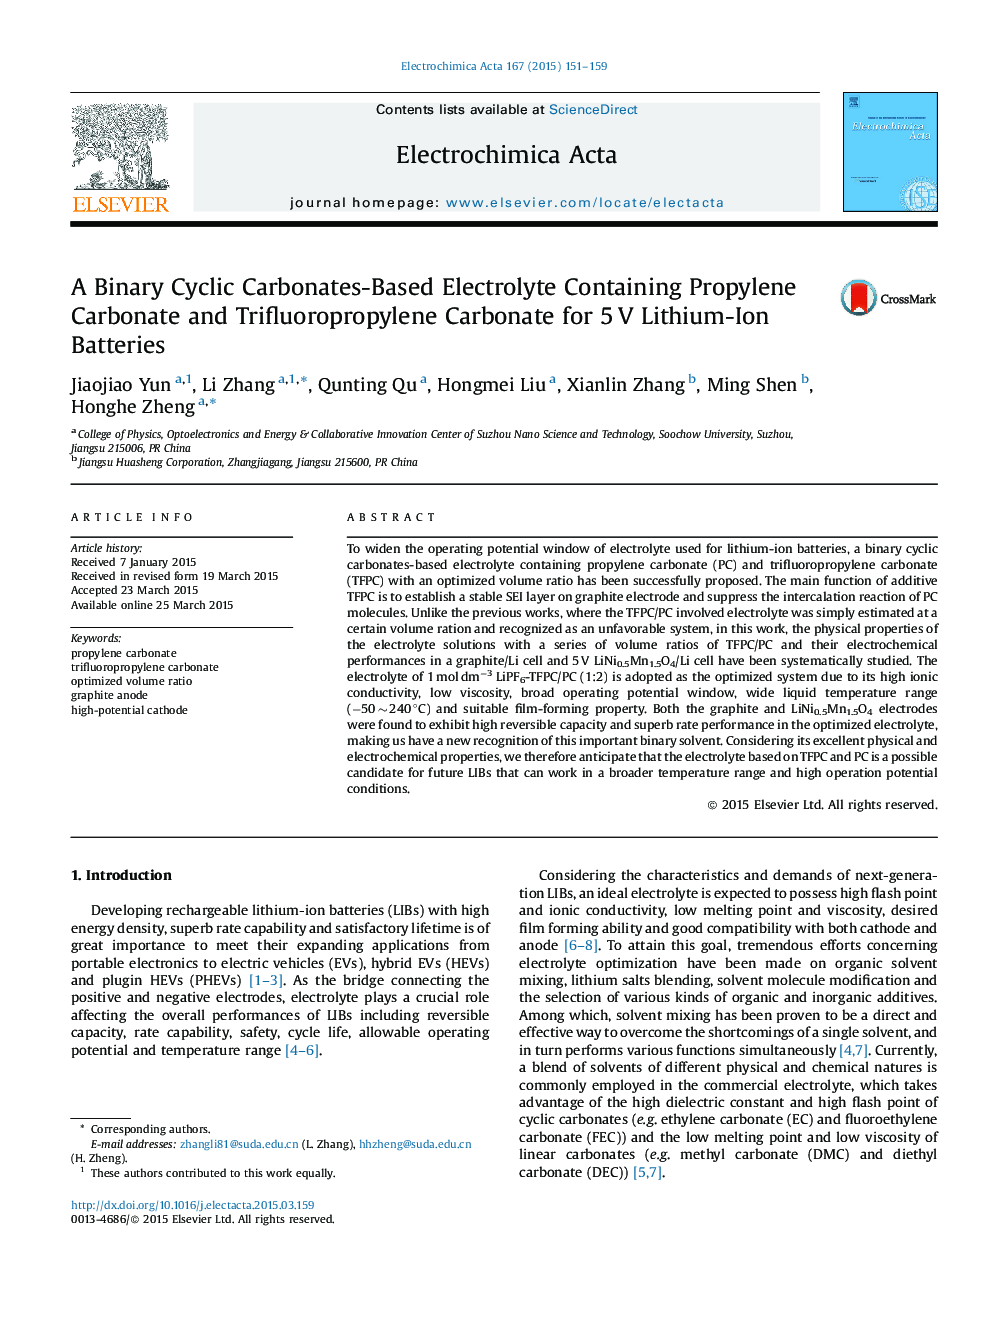 A Binary Cyclic Carbonates-Based Electrolyte Containing Propylene Carbonate and Trifluoropropylene Carbonate for 5 V Lithium-Ion Batteries